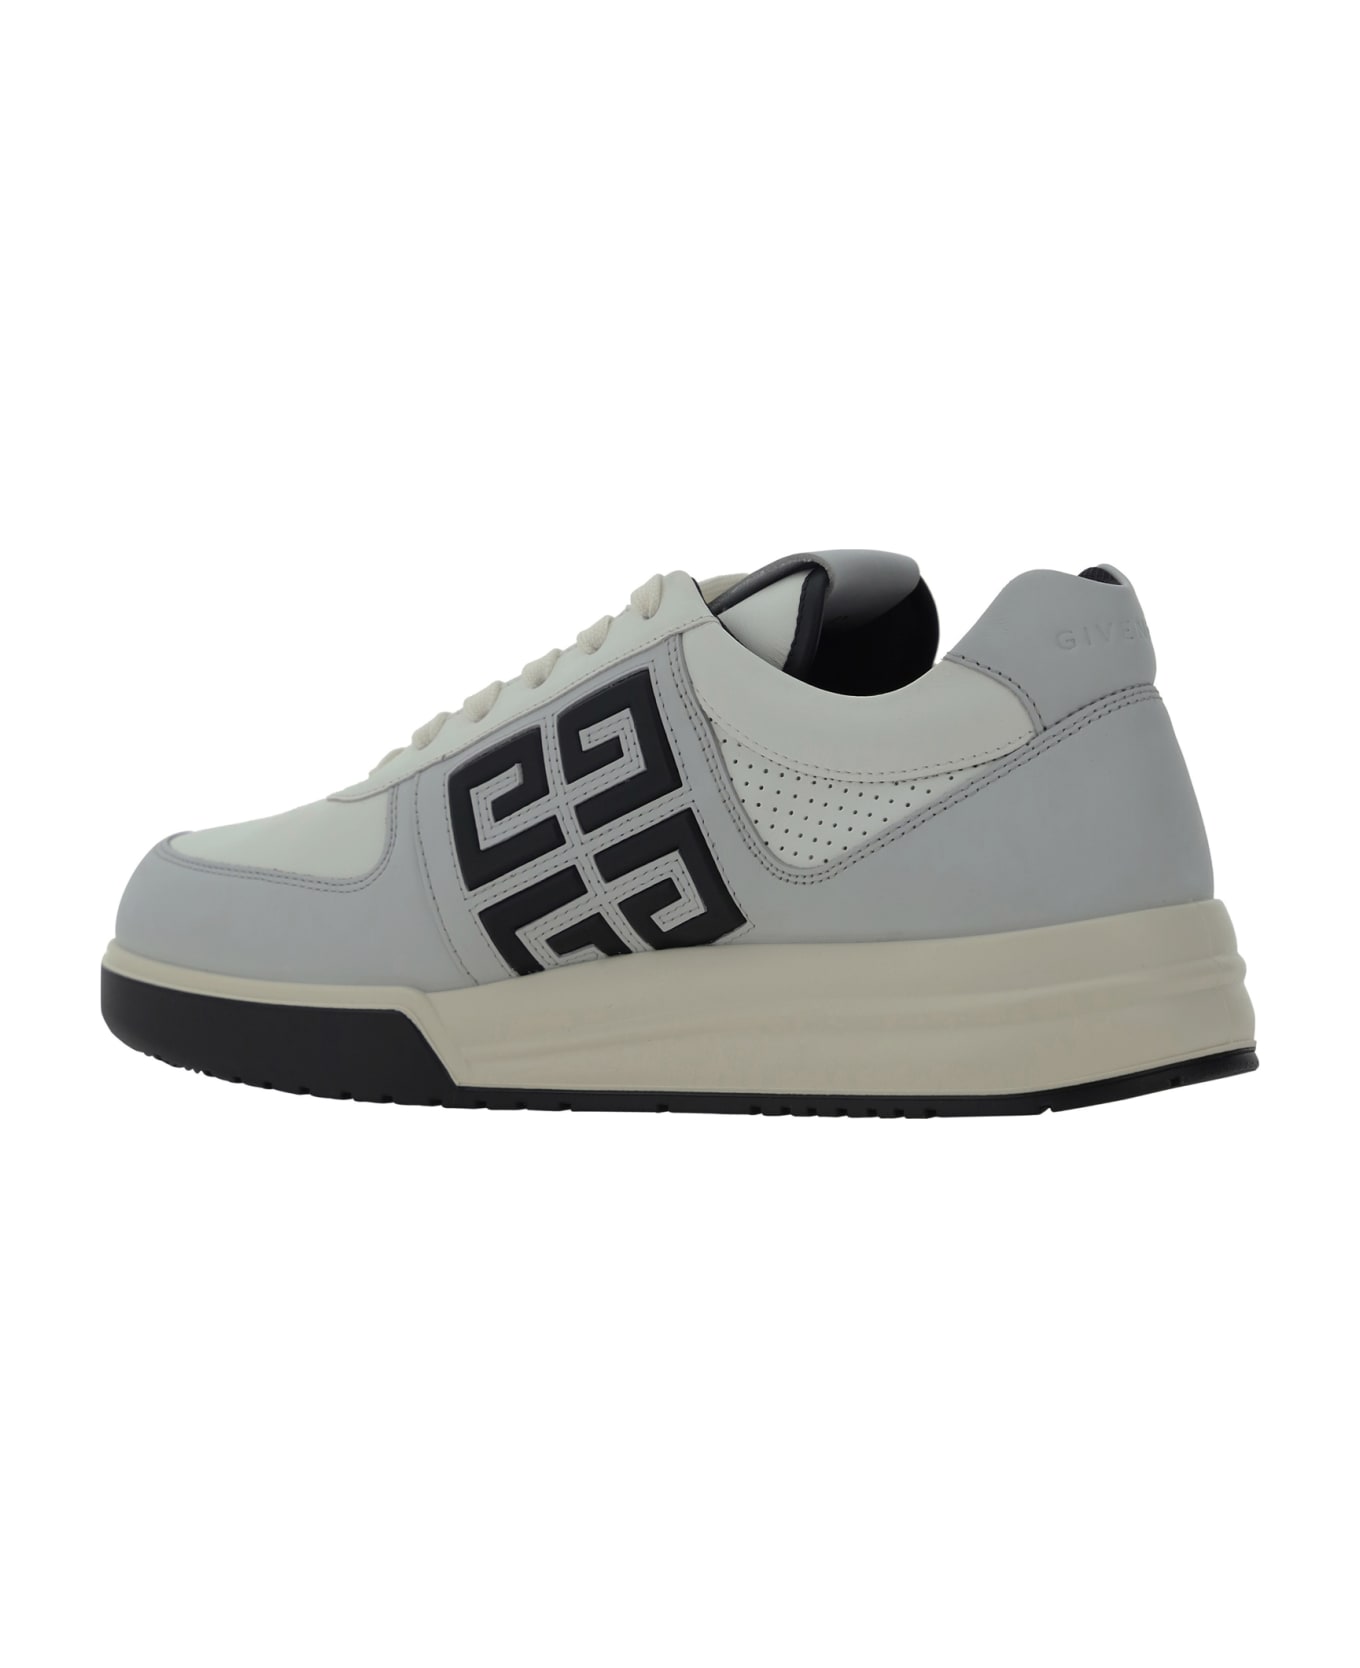 Givenchy G4 Low Top Sneakers - Grey/black